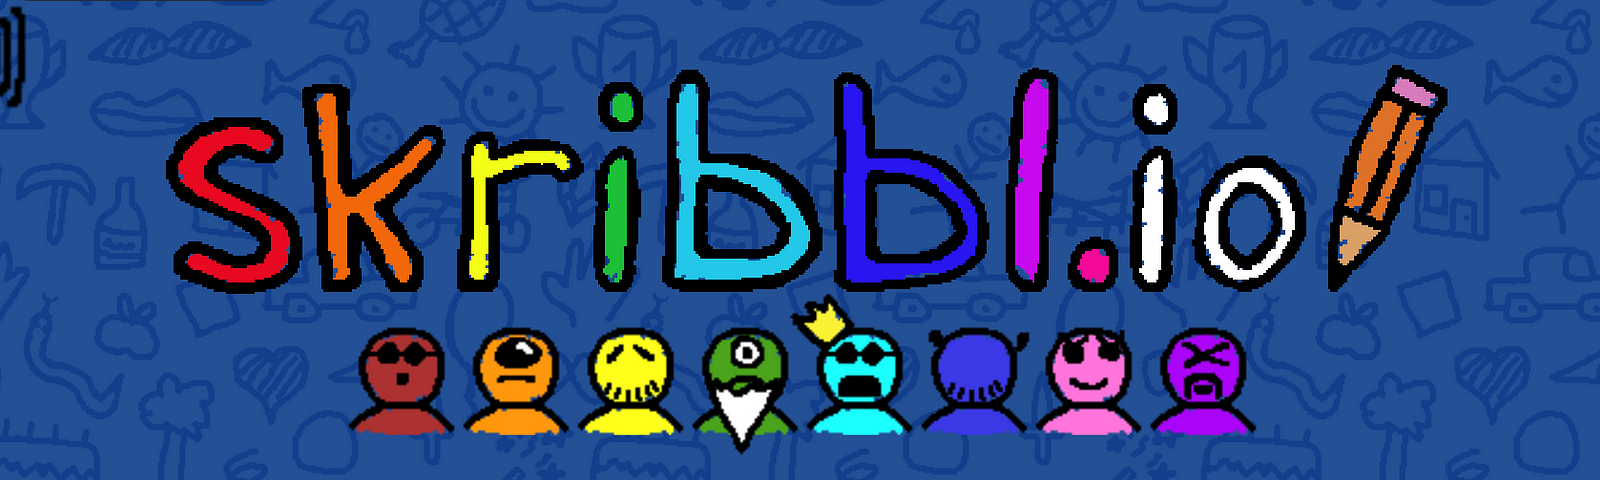 How to Your Friends Skribbl.io | by Kevin Medium